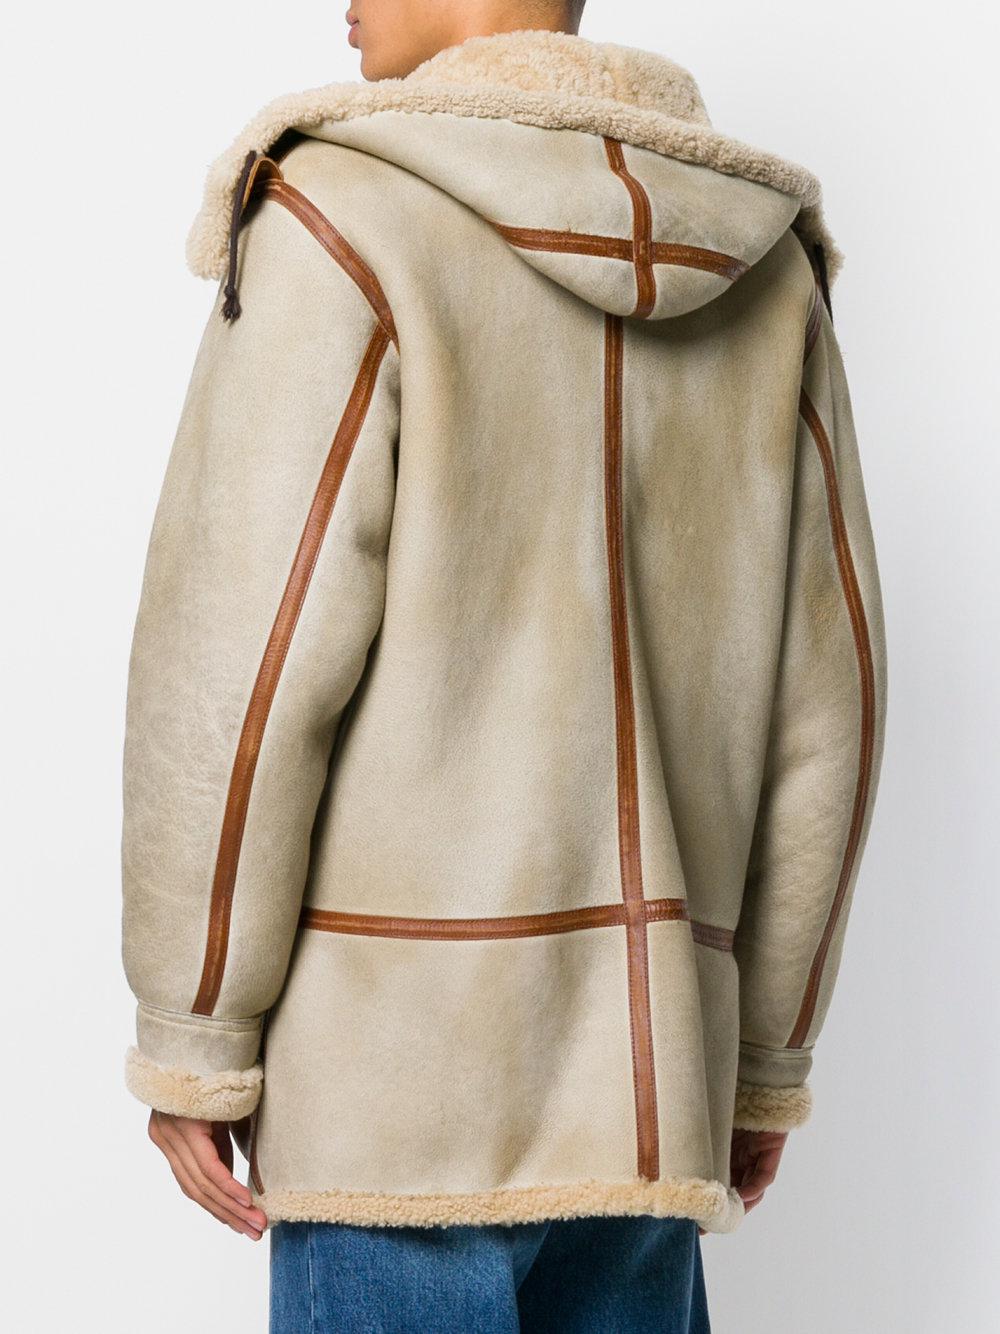 Yeezy Leather Vintage Shearling Jacket in Natural for Men | Lyst